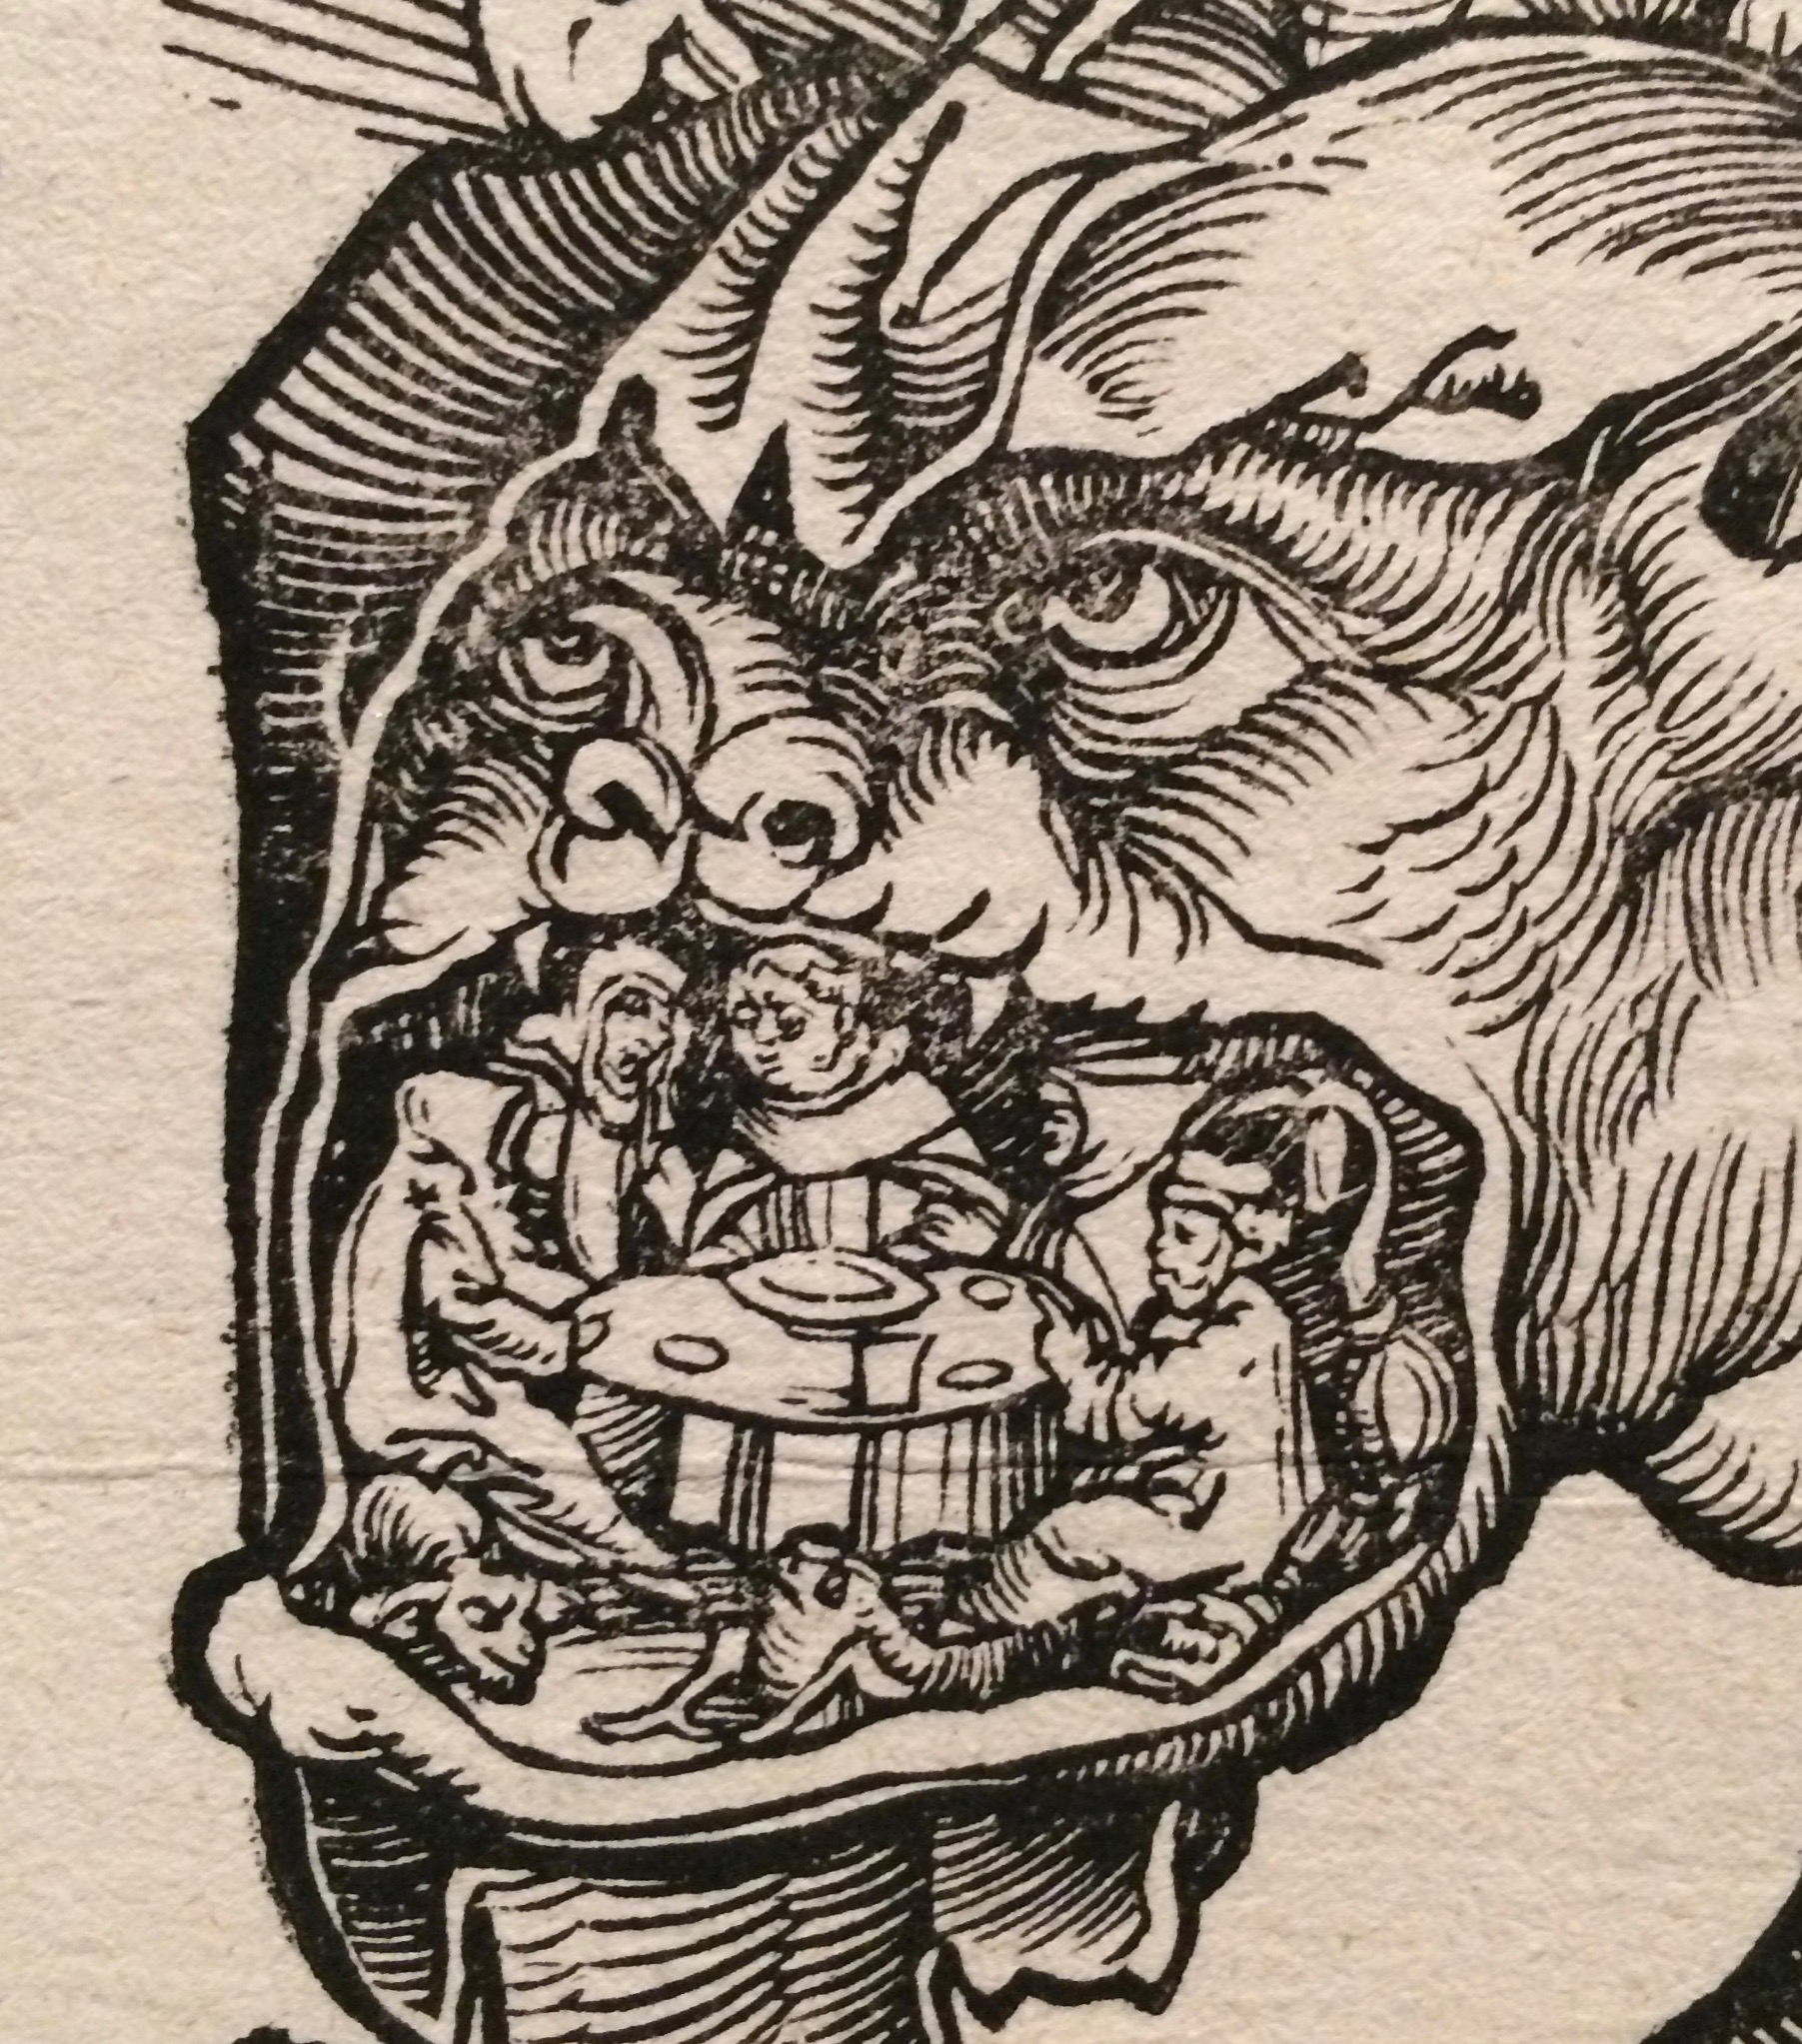 A monk, a friar, two nuns, and a canon are already enjoying the first course in the jaws of hell, while two demons loll at their feet. At a time when famine lurked around the corner, food and cooking were especially powerful tools to convey greed and excess in 16th century Europe.